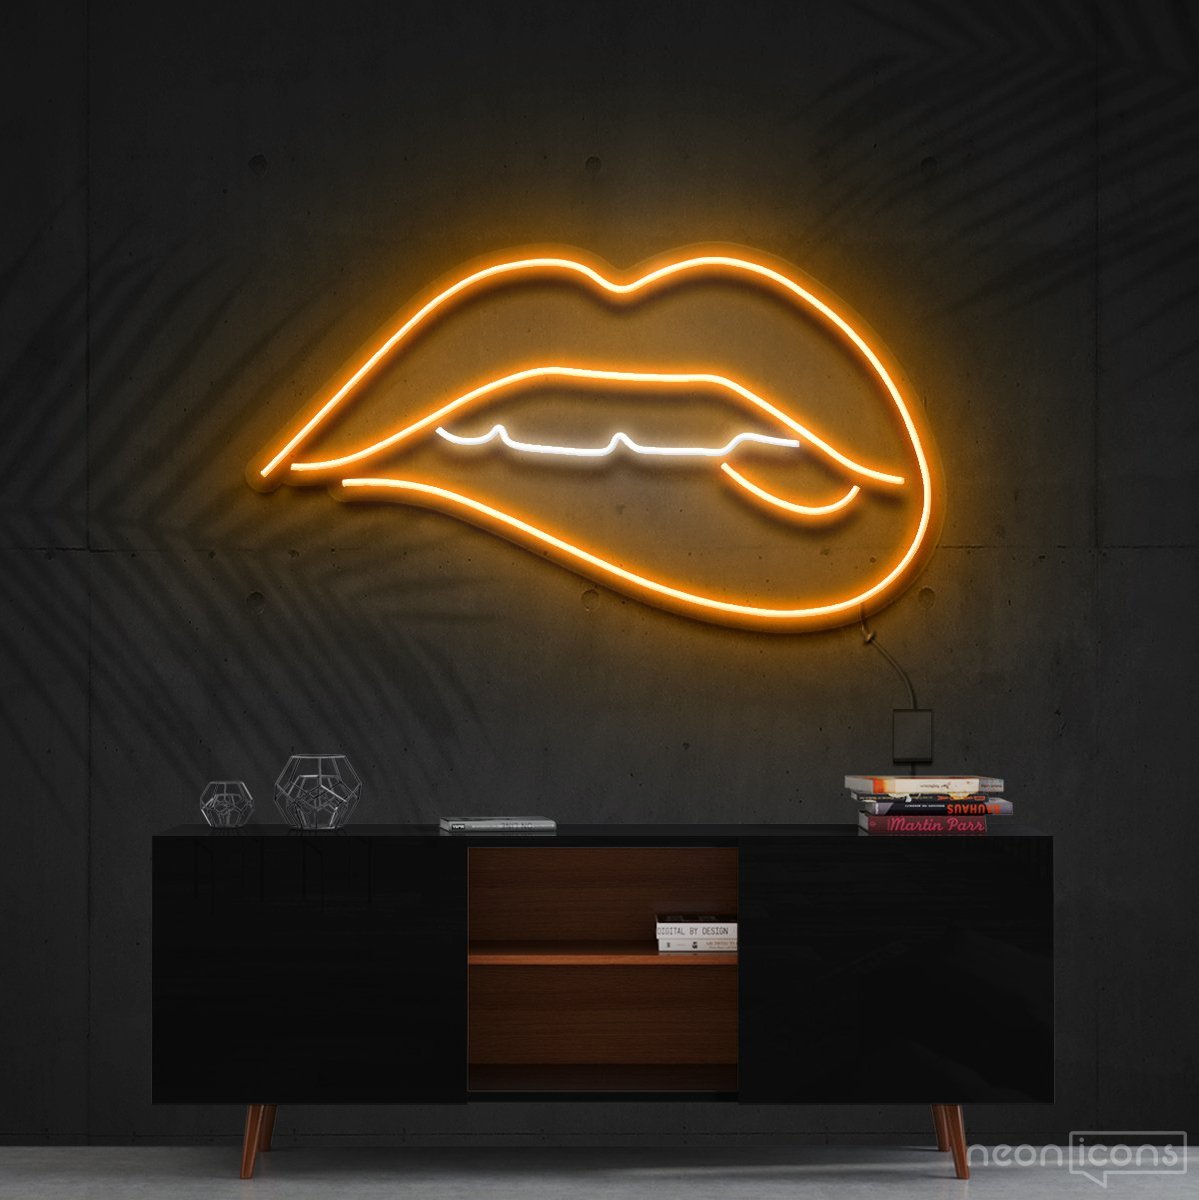 "Lips Biting" White Neon Sign 60cm (2ft) / Orange / Cut to Shape by Neon Icons